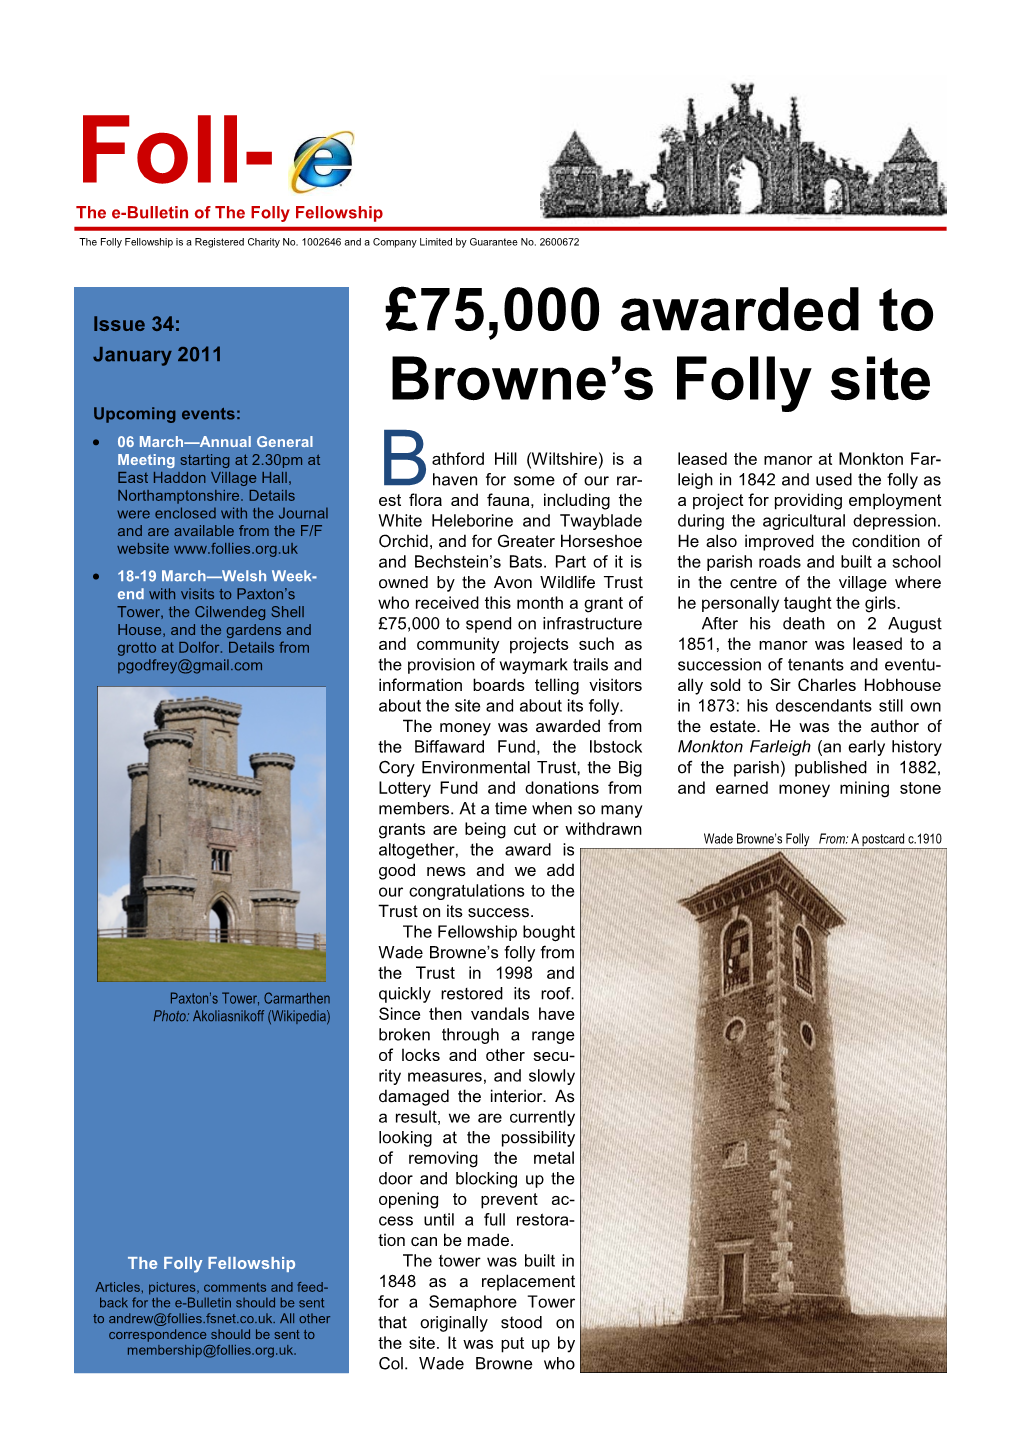 £75,000 Awarded to Browne's Folly Site